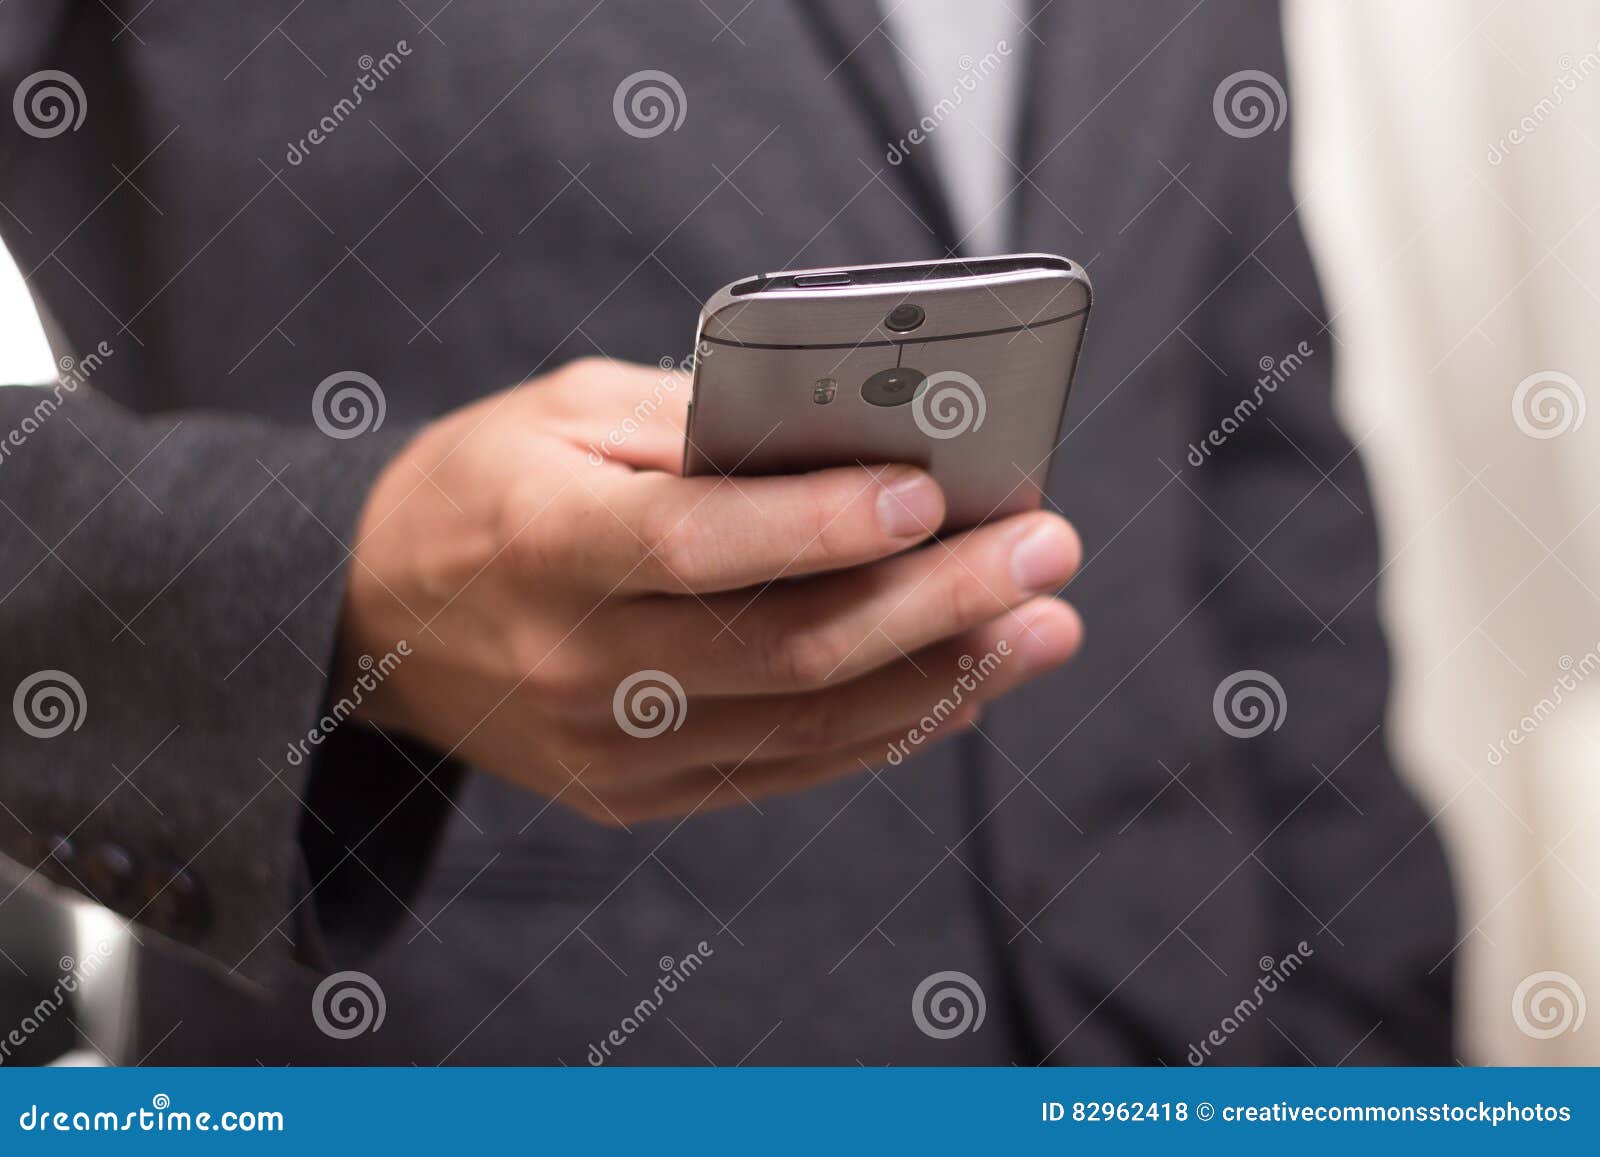 Man Wearing Black Suit Jacket Holding Gray Htc Android Smartphone ...